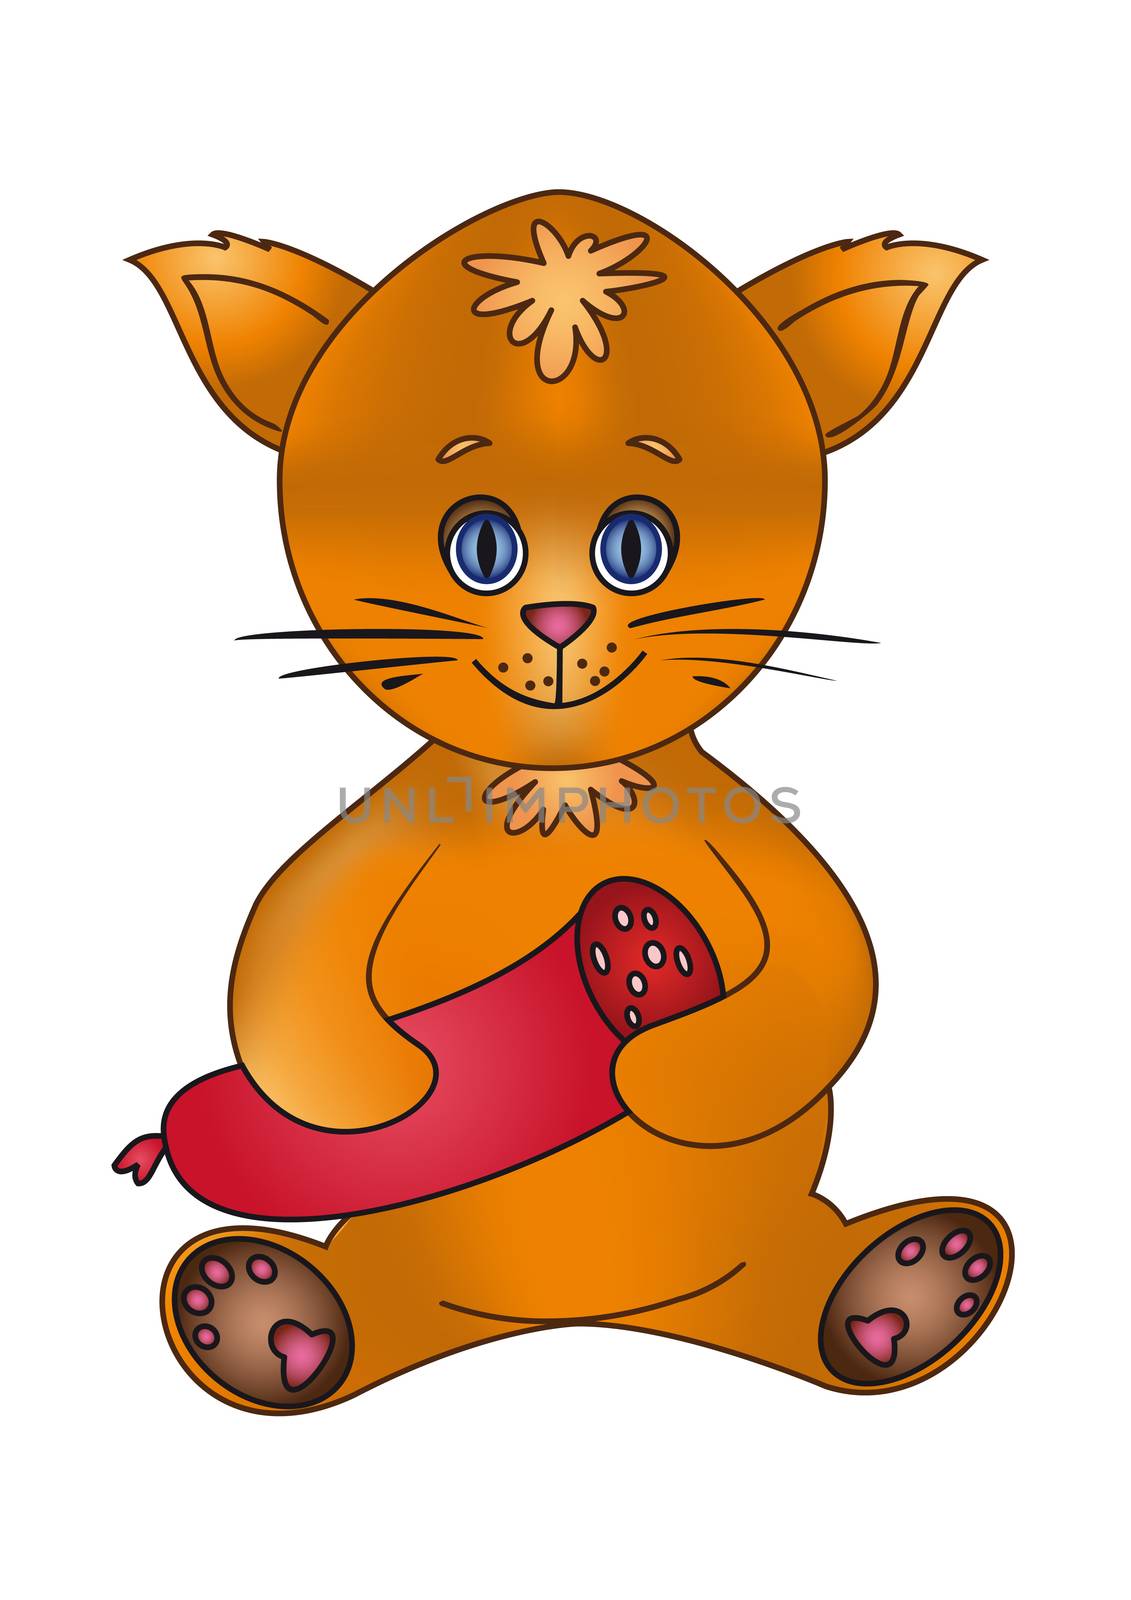 Cheerful red toy cat smiling and holding sausage in his paws